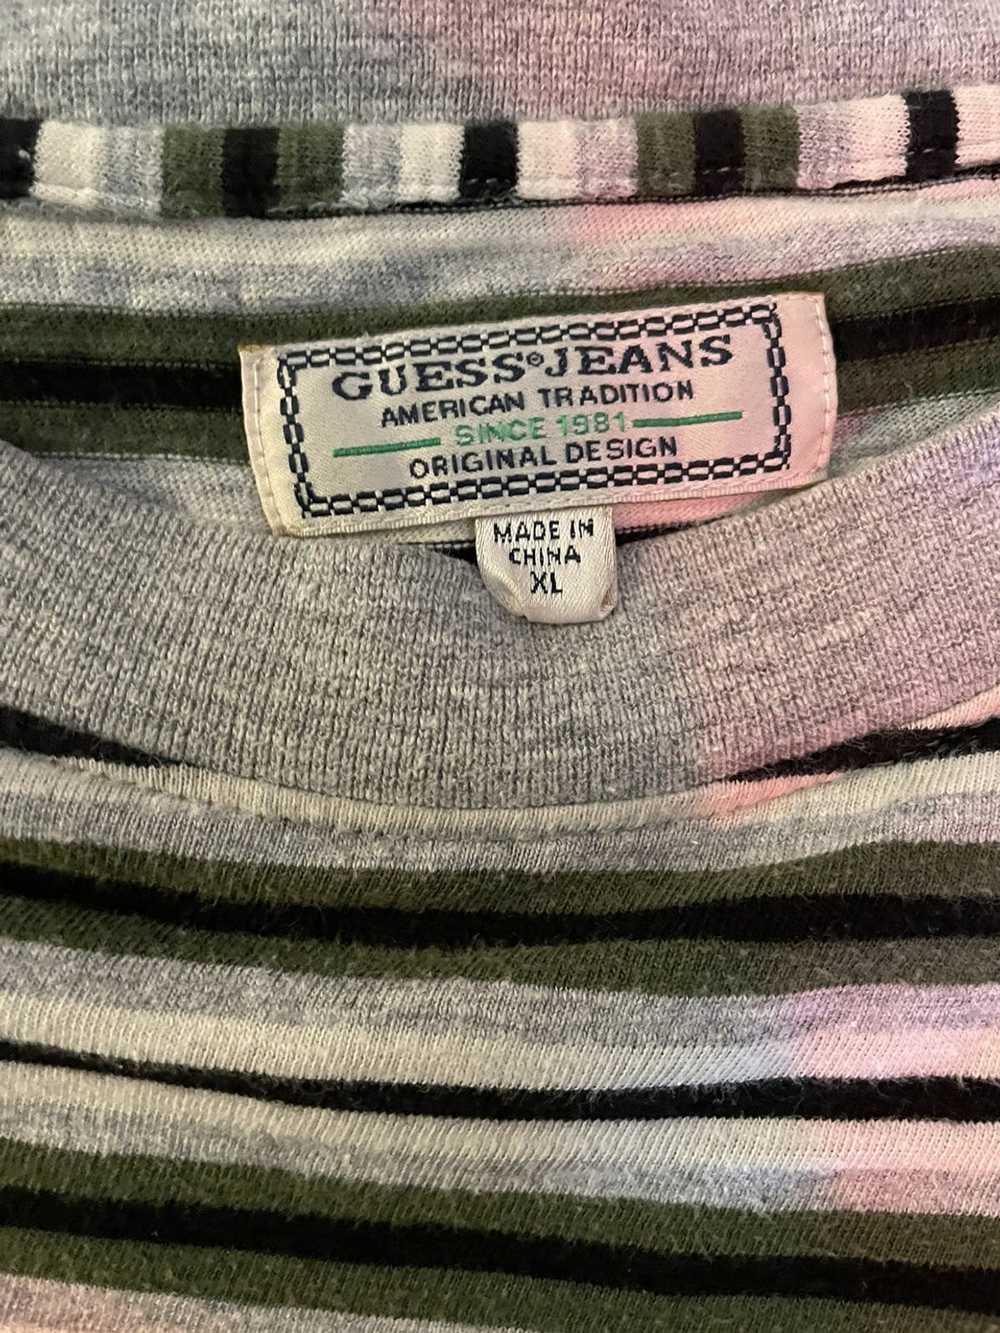 Guess Guess Jeans Striped Tee - image 4